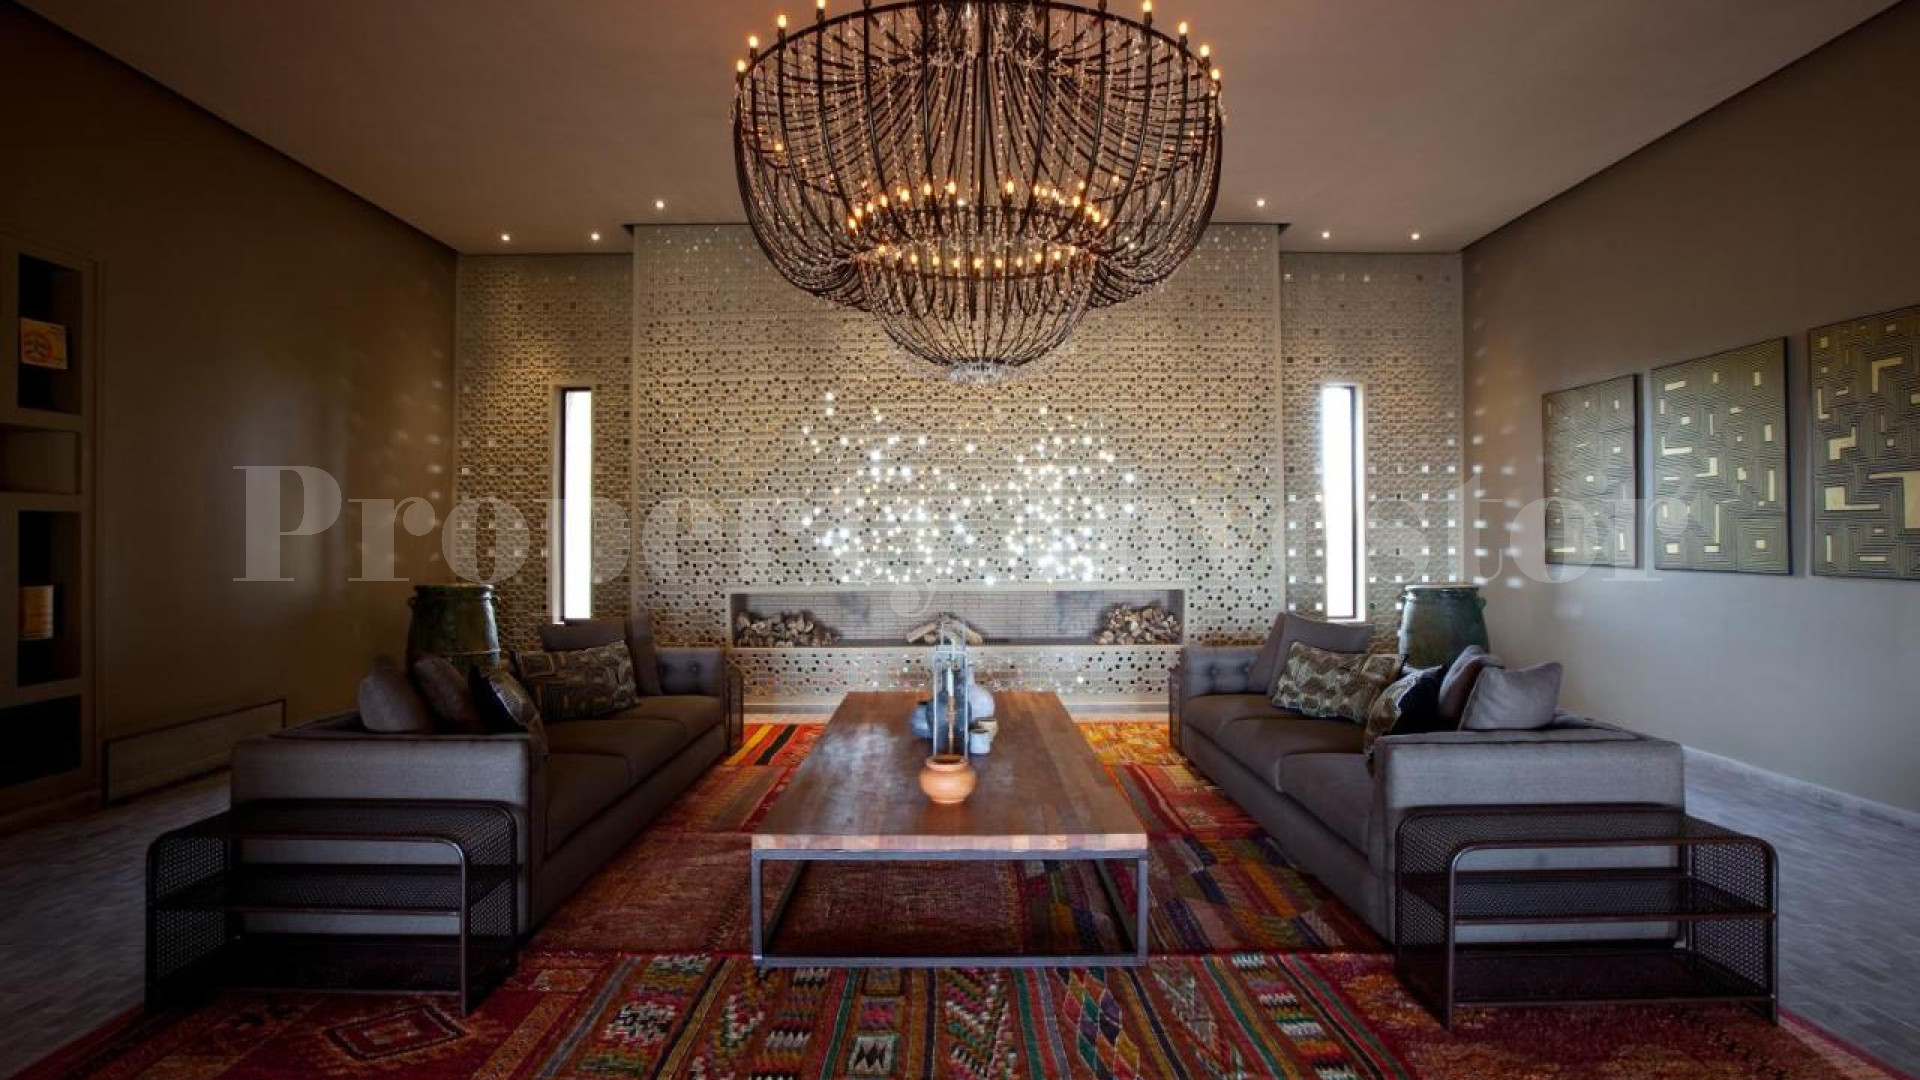 Modern 20 Suite Boutique Hotel for Sale in Marrakech, Morocco